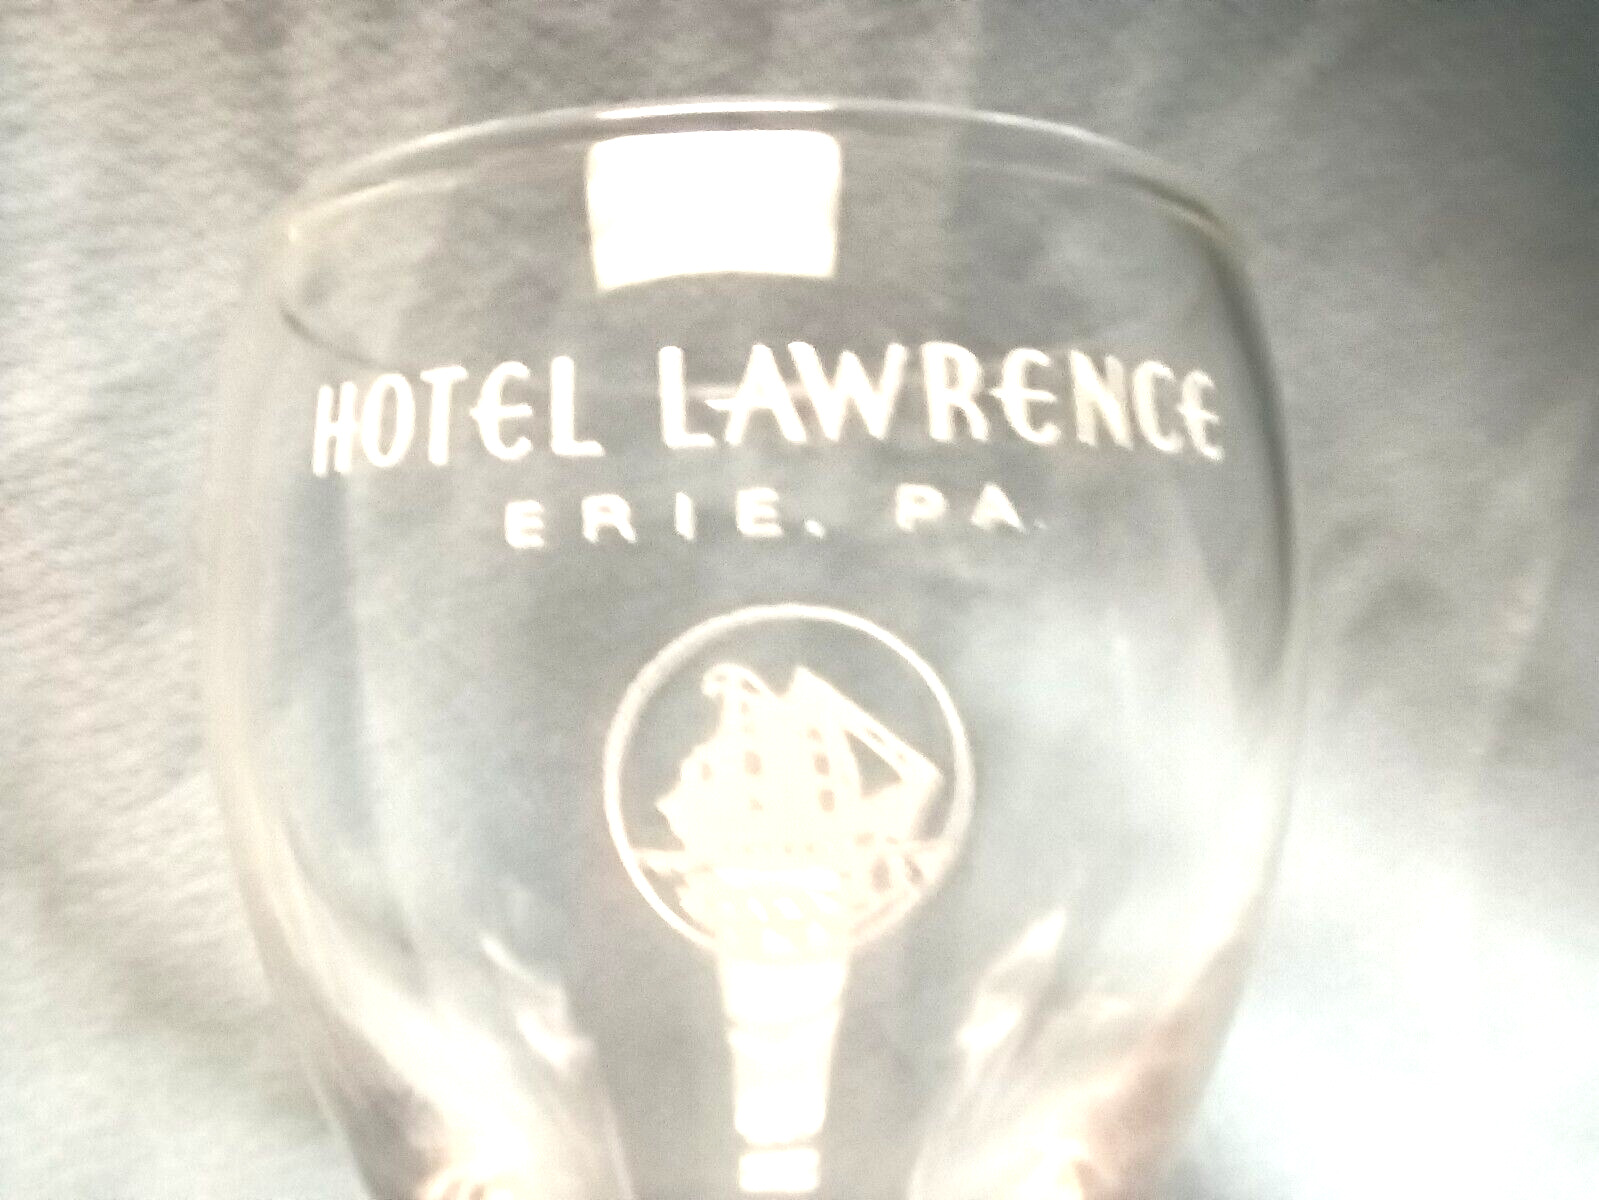 ERIE PA HOTEL LAWRENCE Glass ADVERTISING Wine TOASTING Tasting 5\